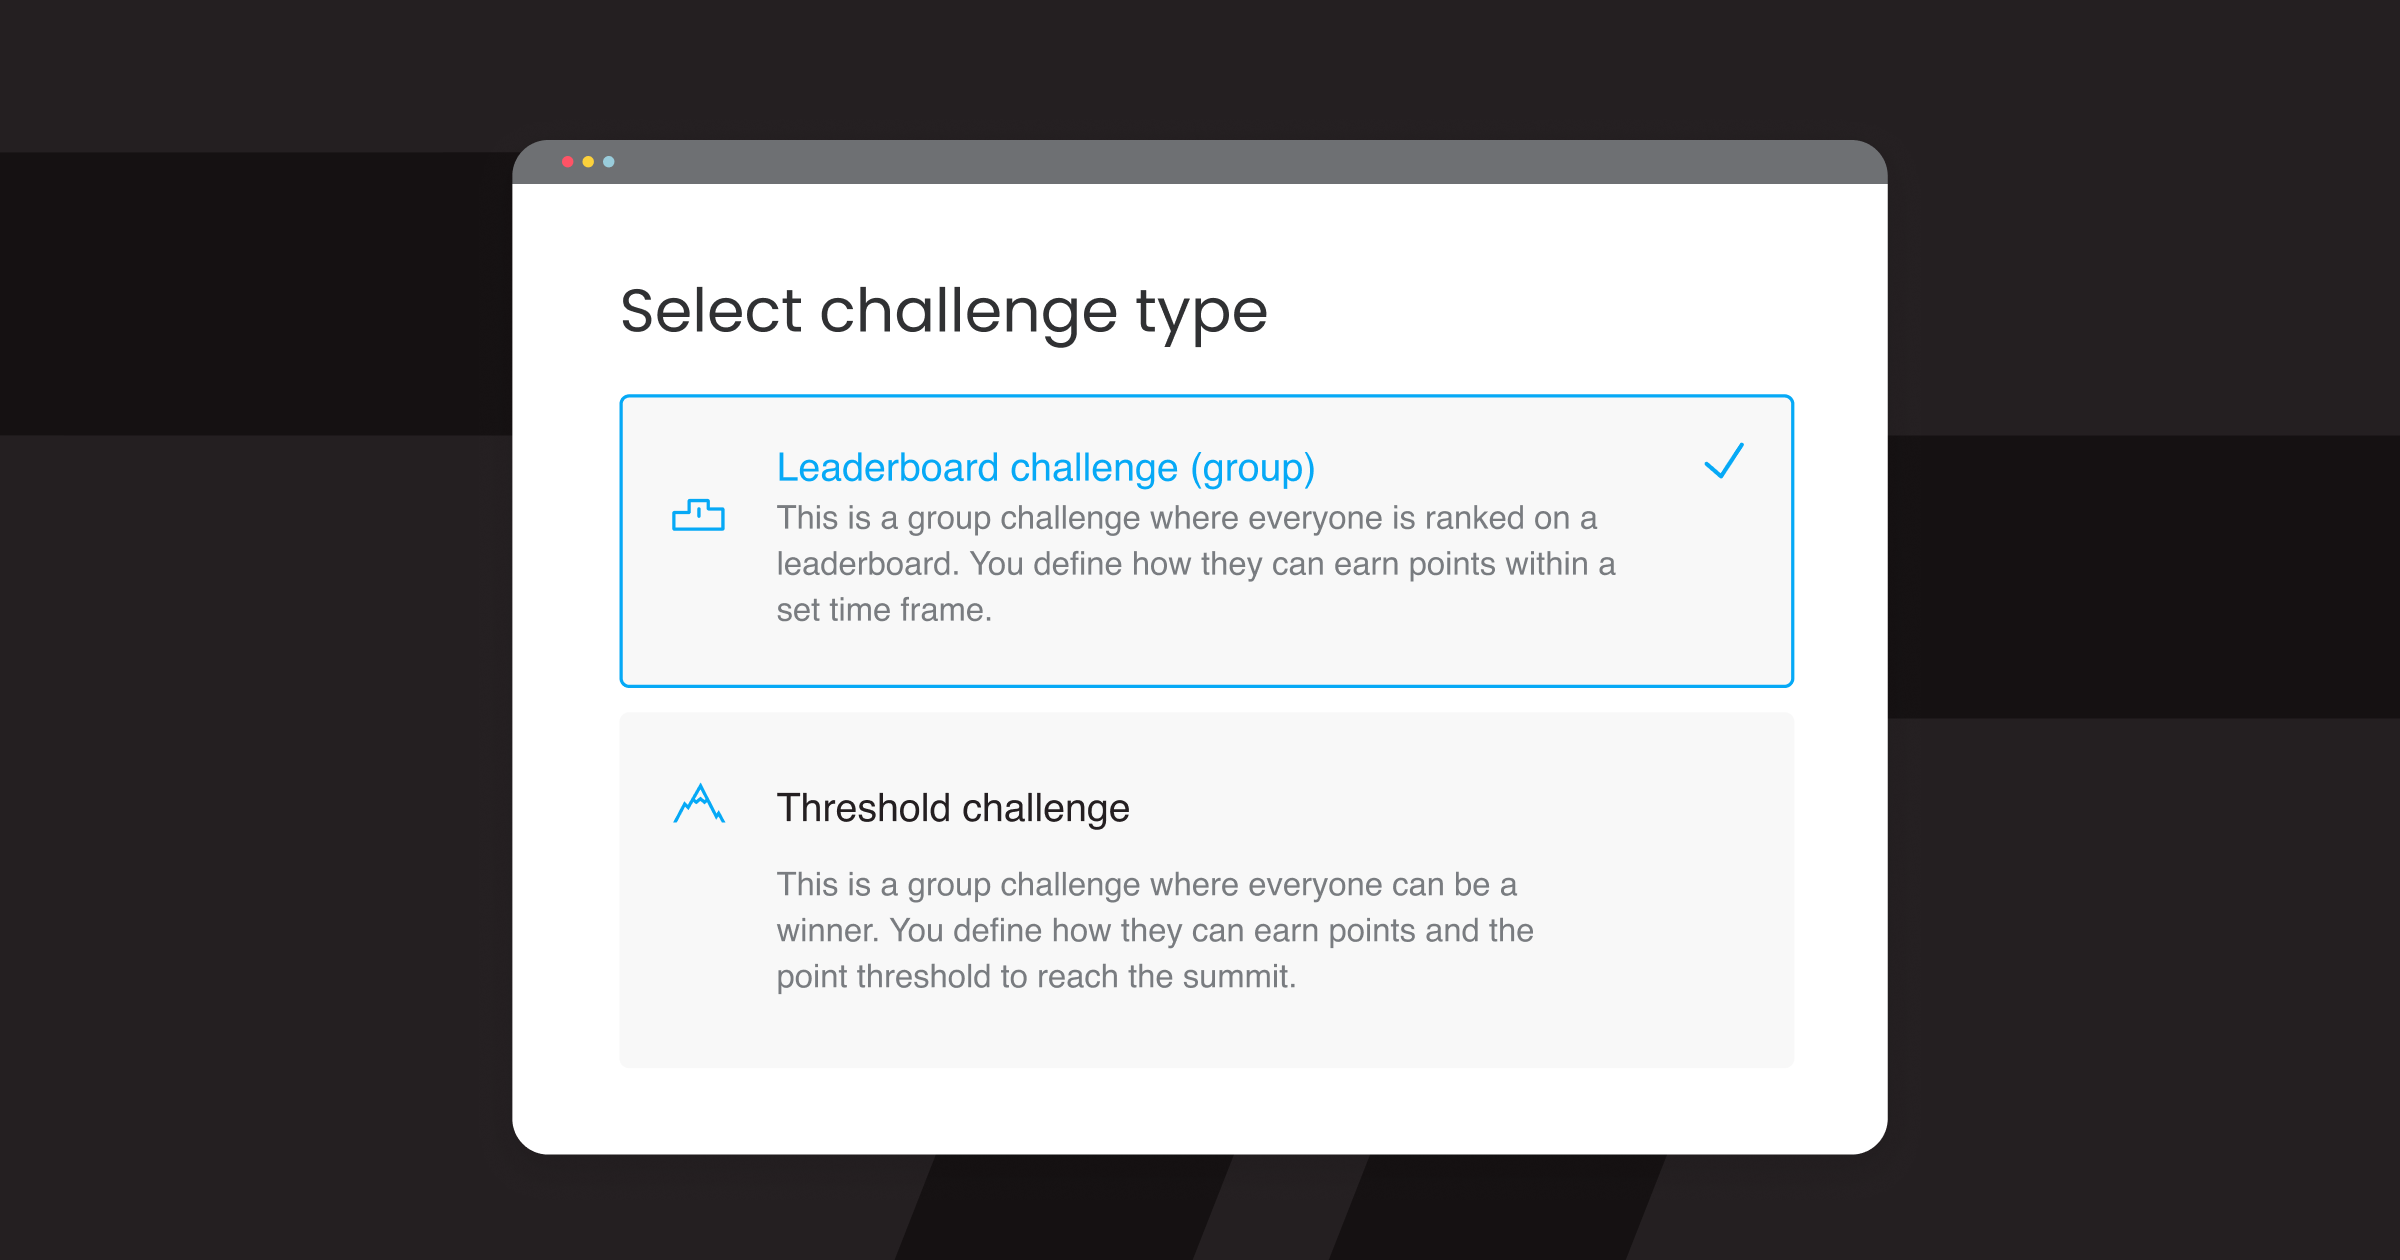 Two different types of challenges: leaderboard and threshold